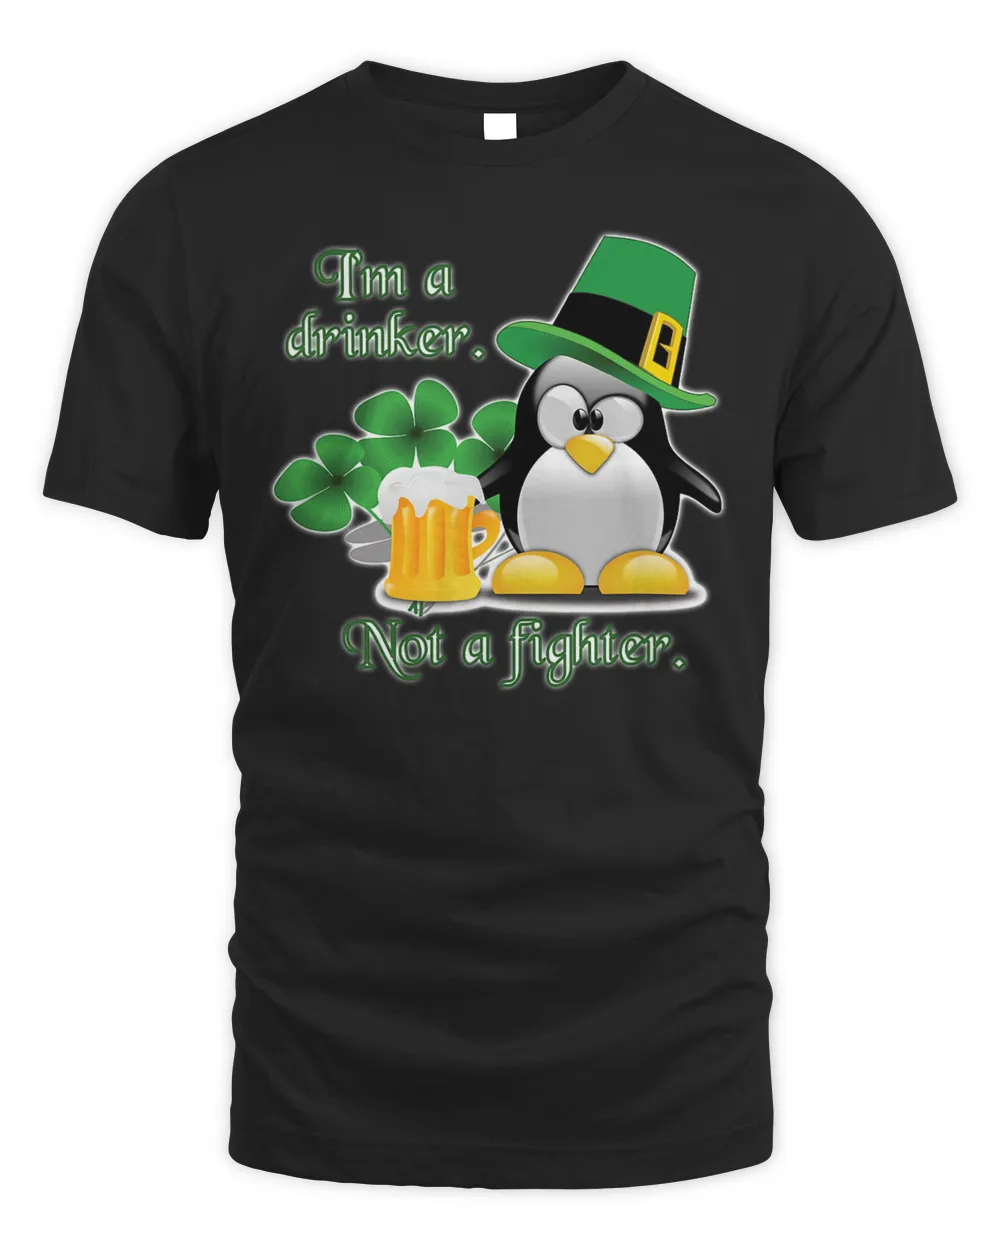 Beer-Drinking Irish Penguin T-Shirt - A Funny and Cute Desig